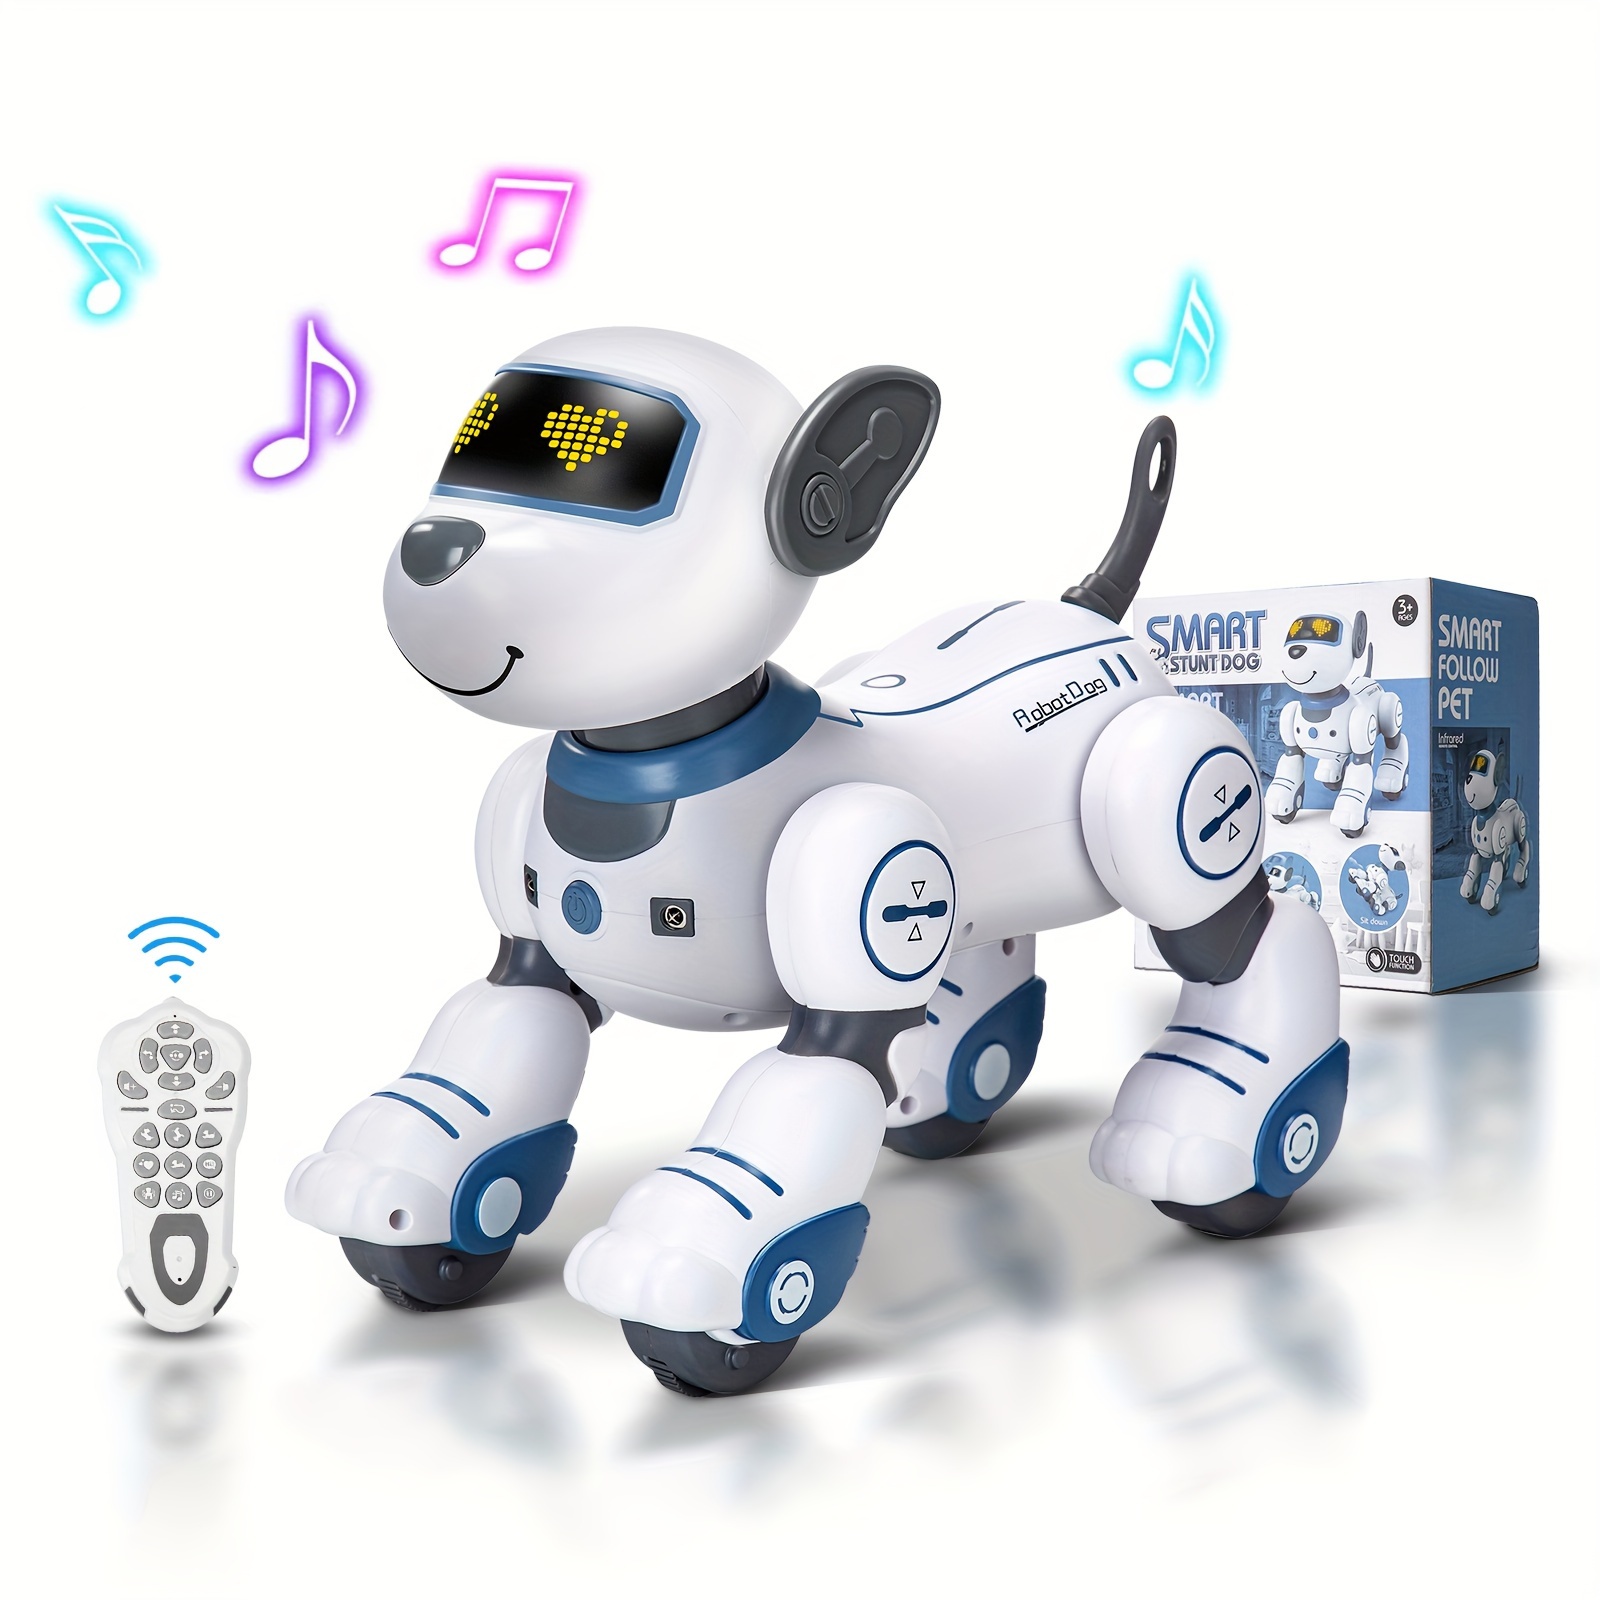 

Remote Control Robot Dog Toy: Programmable Robotic Puppy For Kids Smart Interactive Robot Pet Dog Dancing Singing Stunt Animal Toy For Toddler Toys 3-8 Year Gift